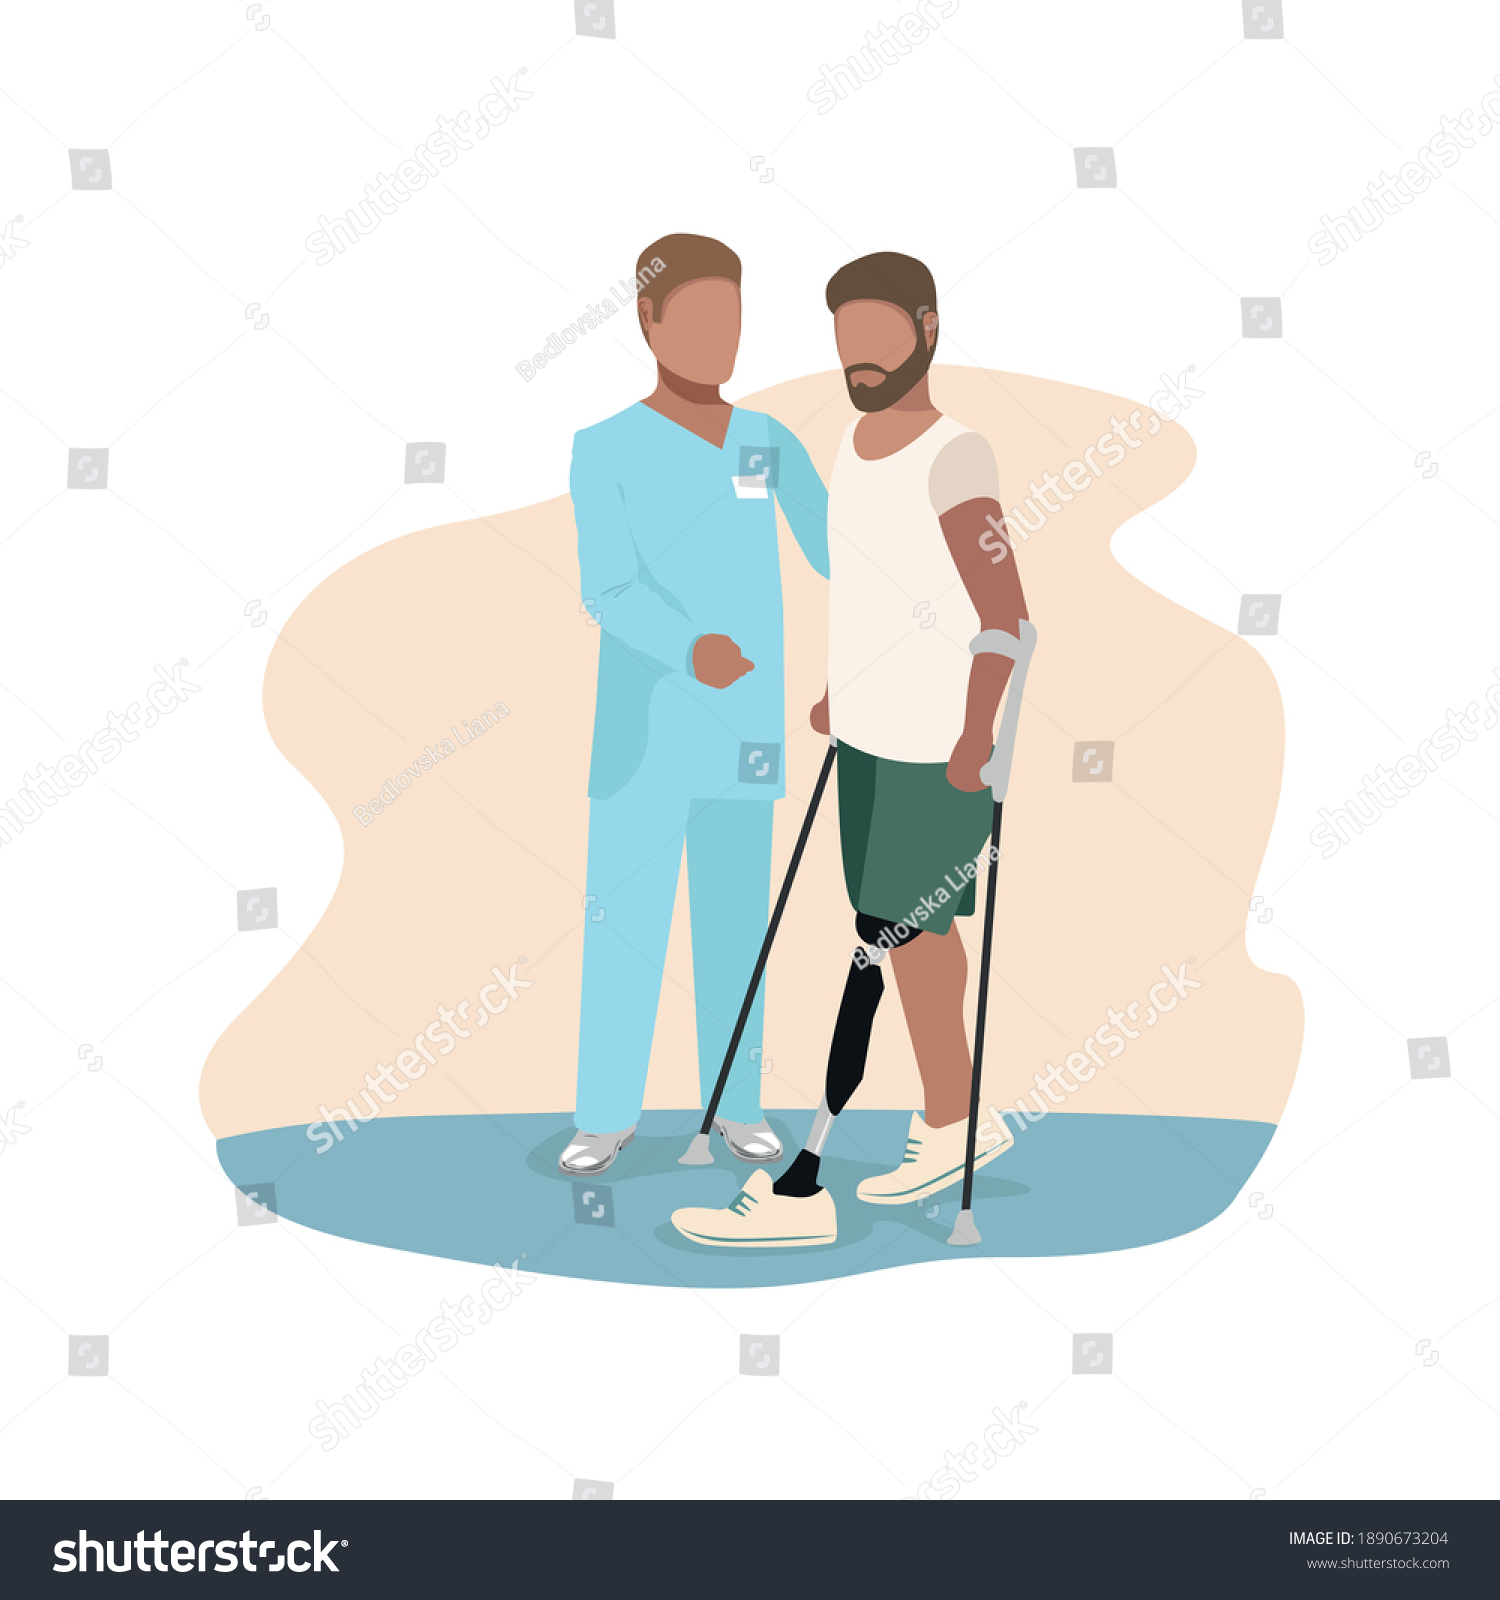 SVG of The doctor helps a man learn to walk on a prosthesis. A man is undergoing rehabilitation after leg amputation. Background vector illustration. svg